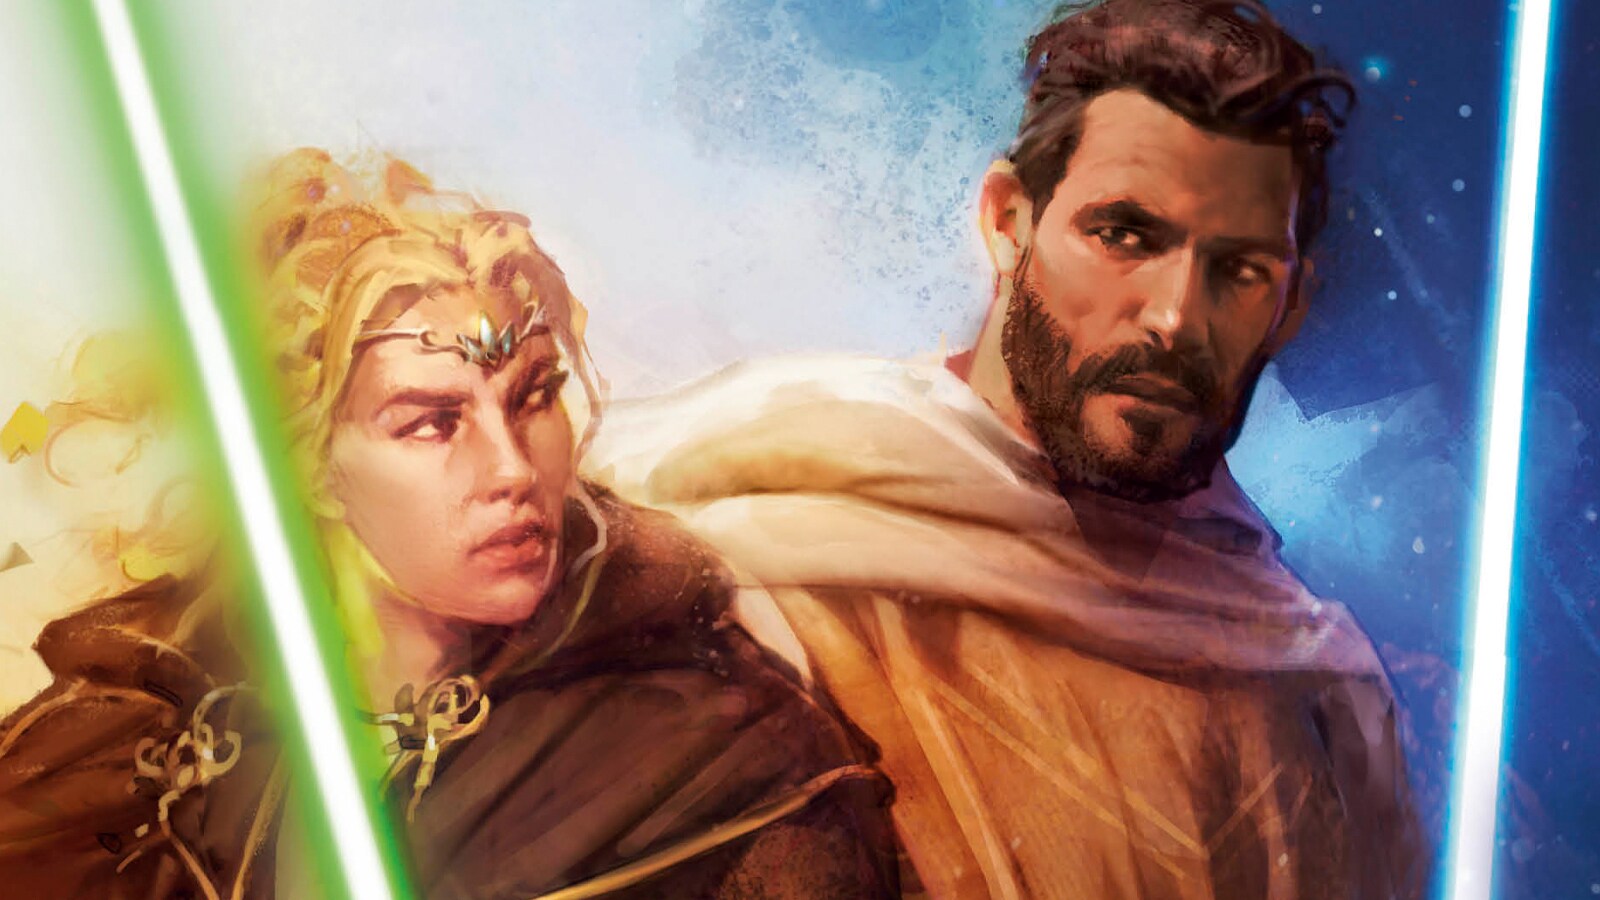 Return of the Jedi Masters Avar Kriss and Elzar Mann in Temptation of the Force — Cover Reveal